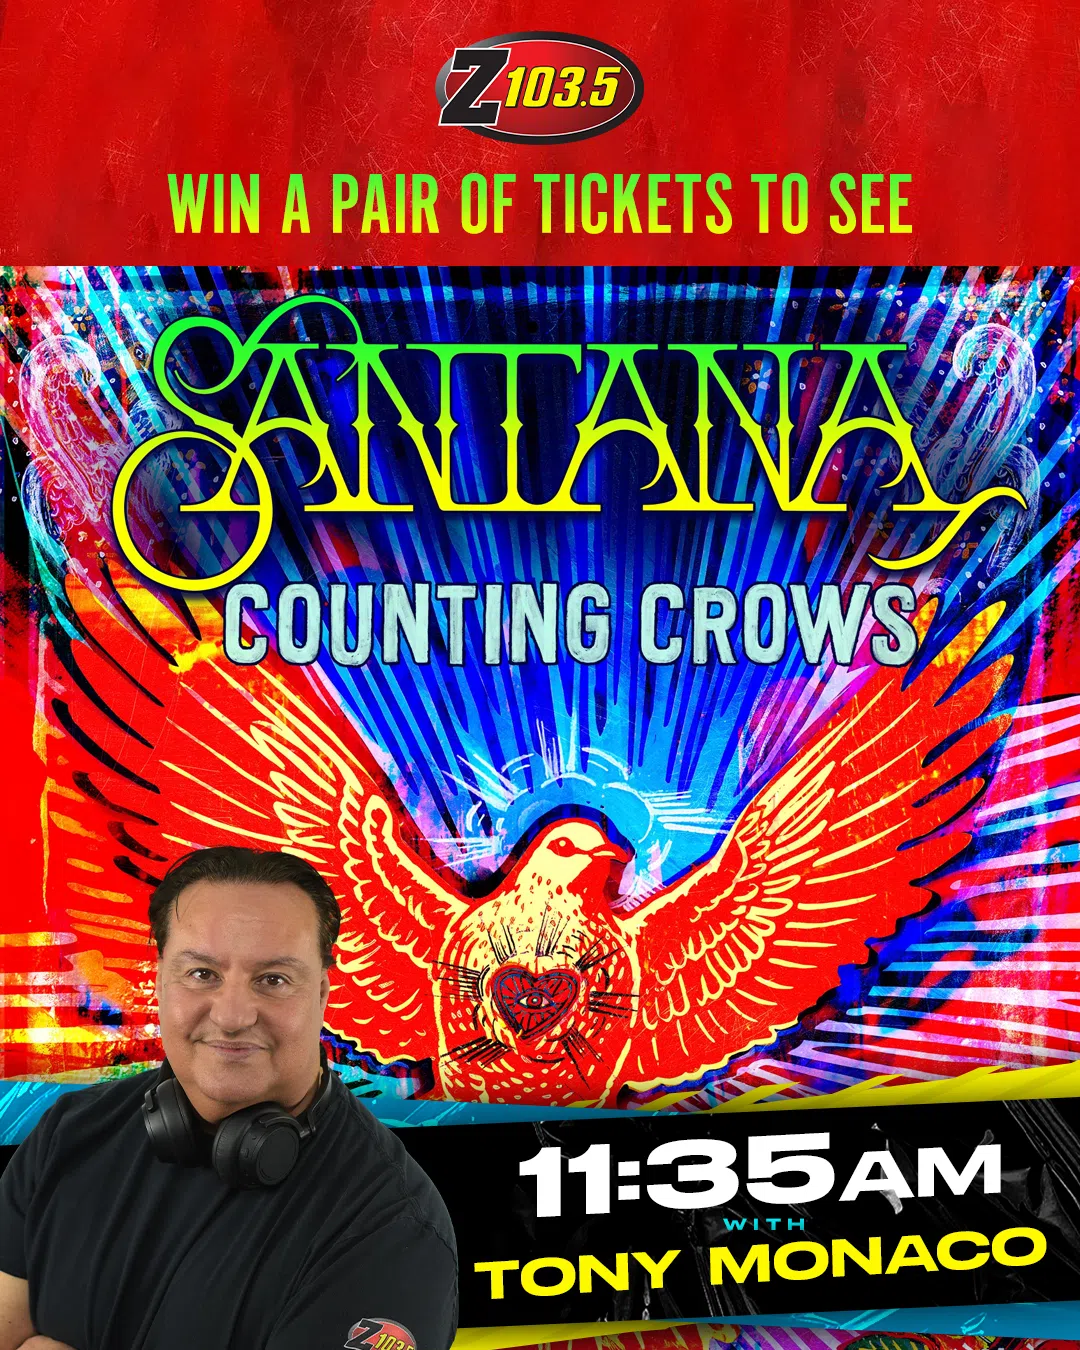 Feature: https://z1035.com/win/win-tickets-to-see-santana/